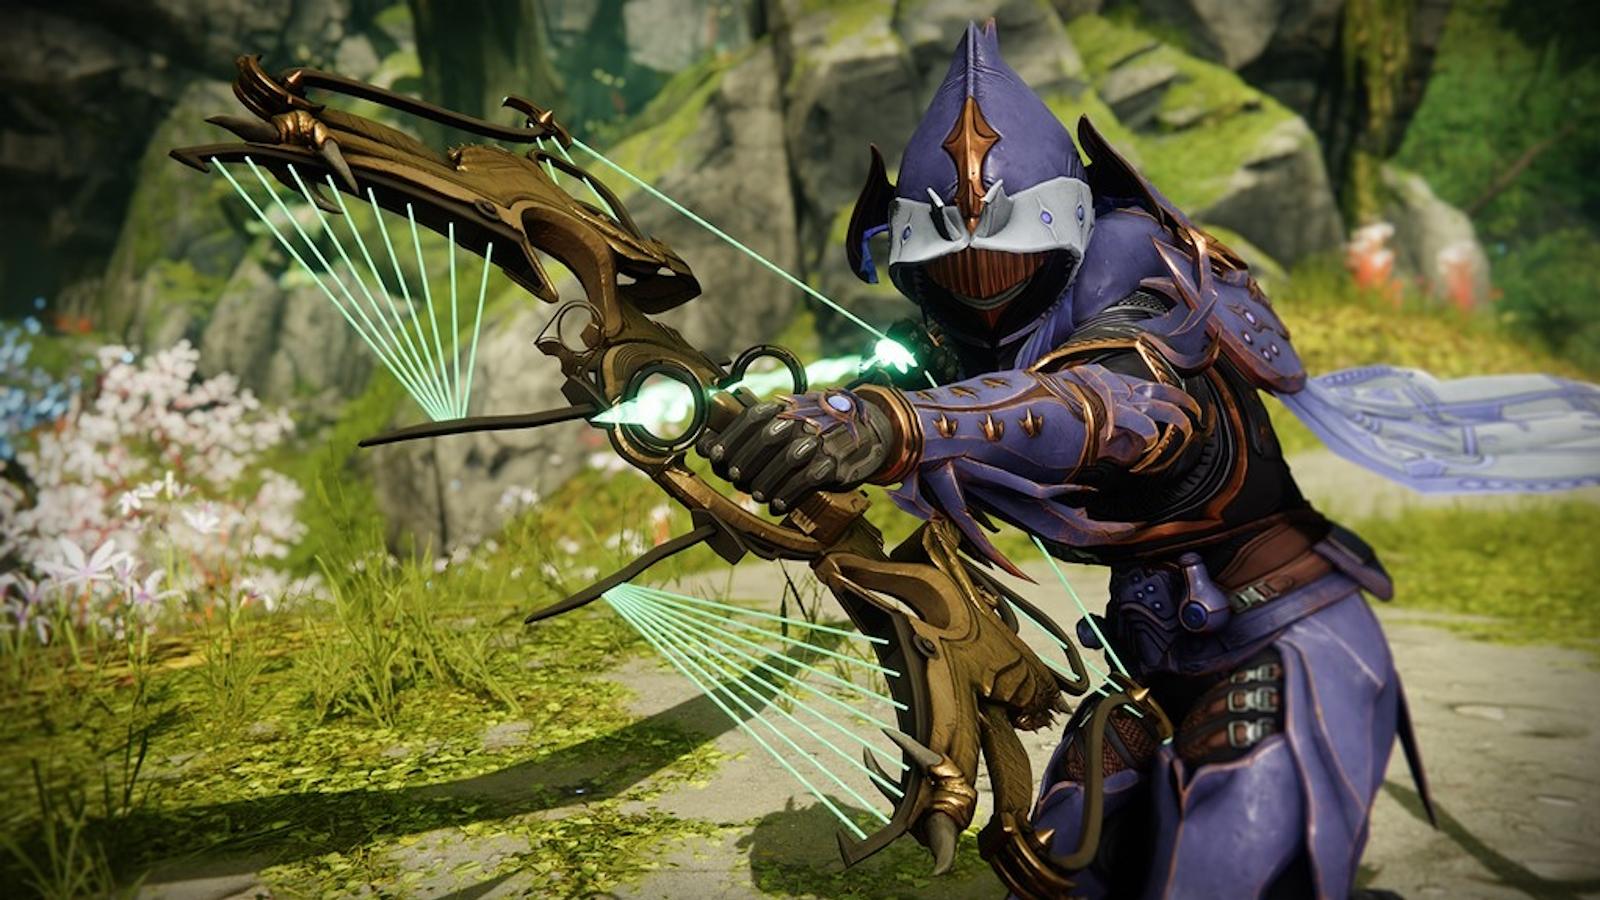 Destiny 2 player using Wish-Keeper bow in Starcrossed exotic mission.